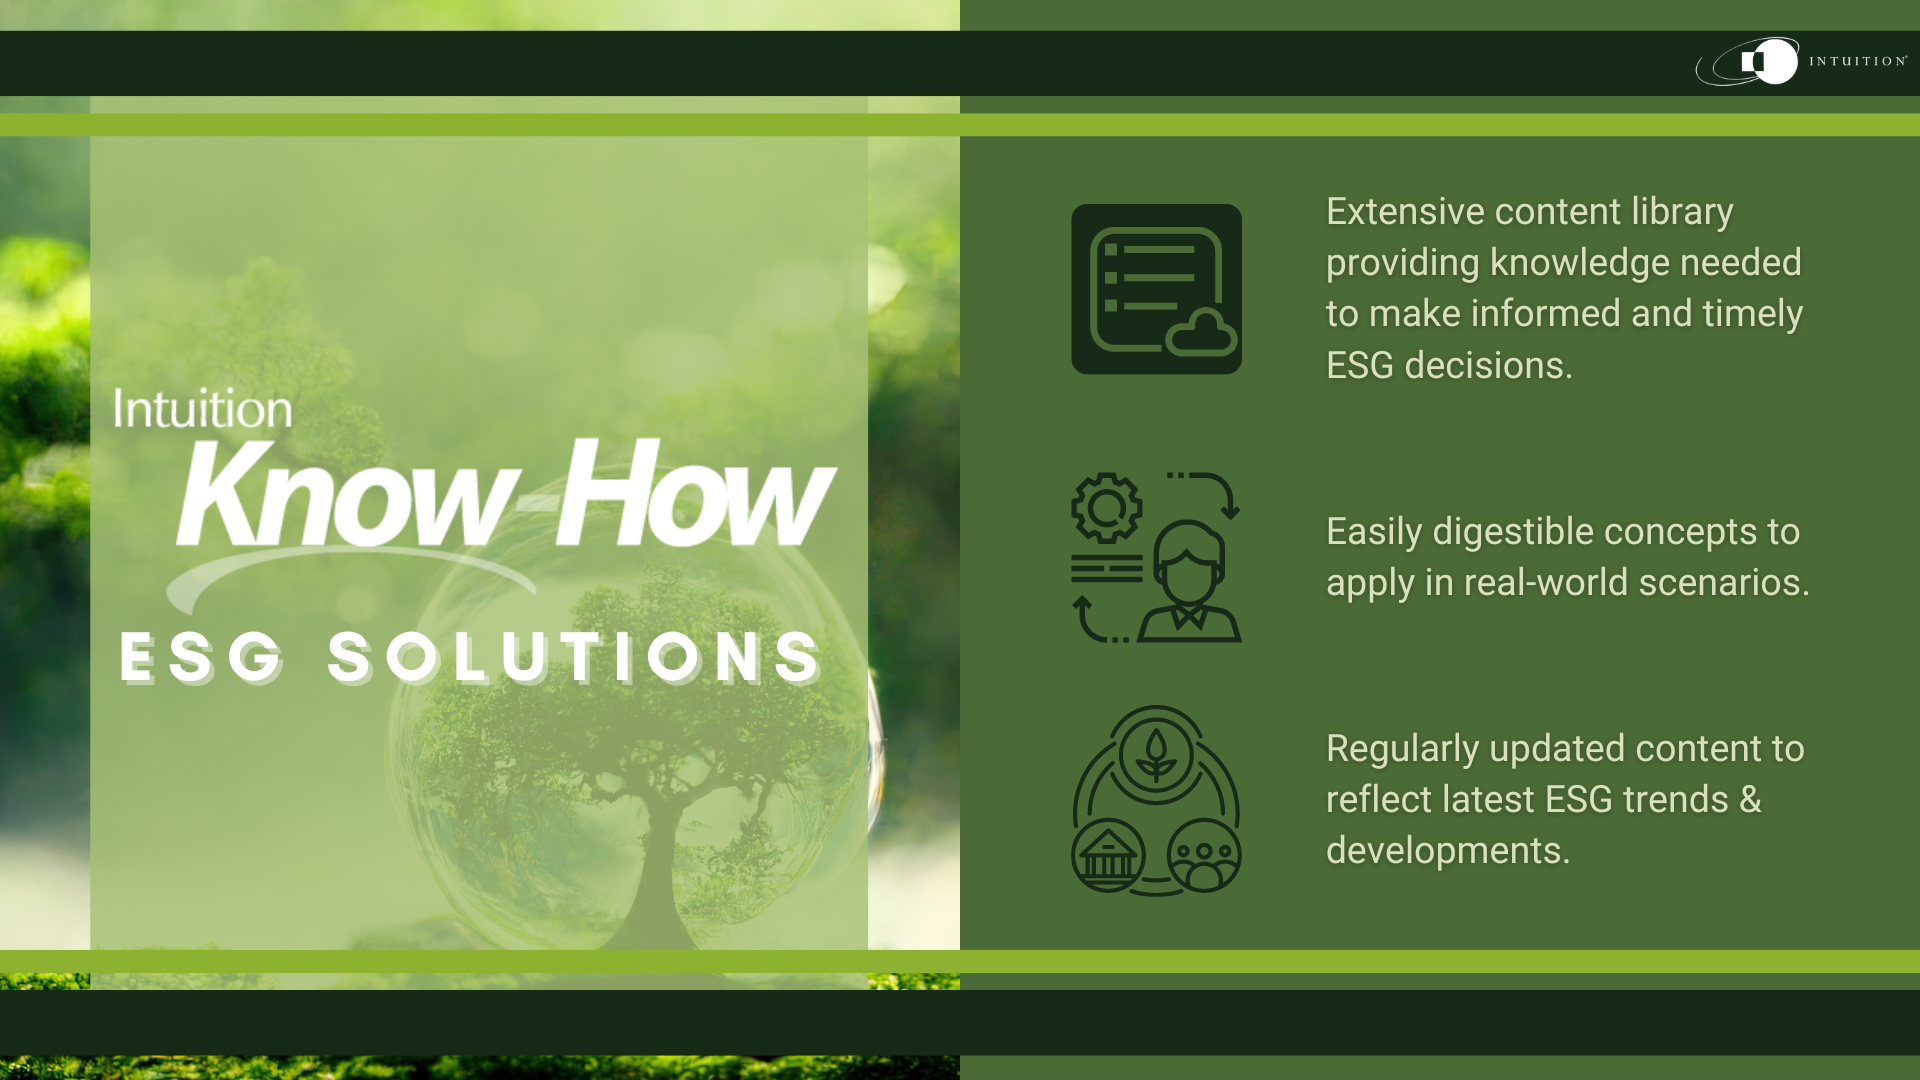 Intuition Know-How ESG content